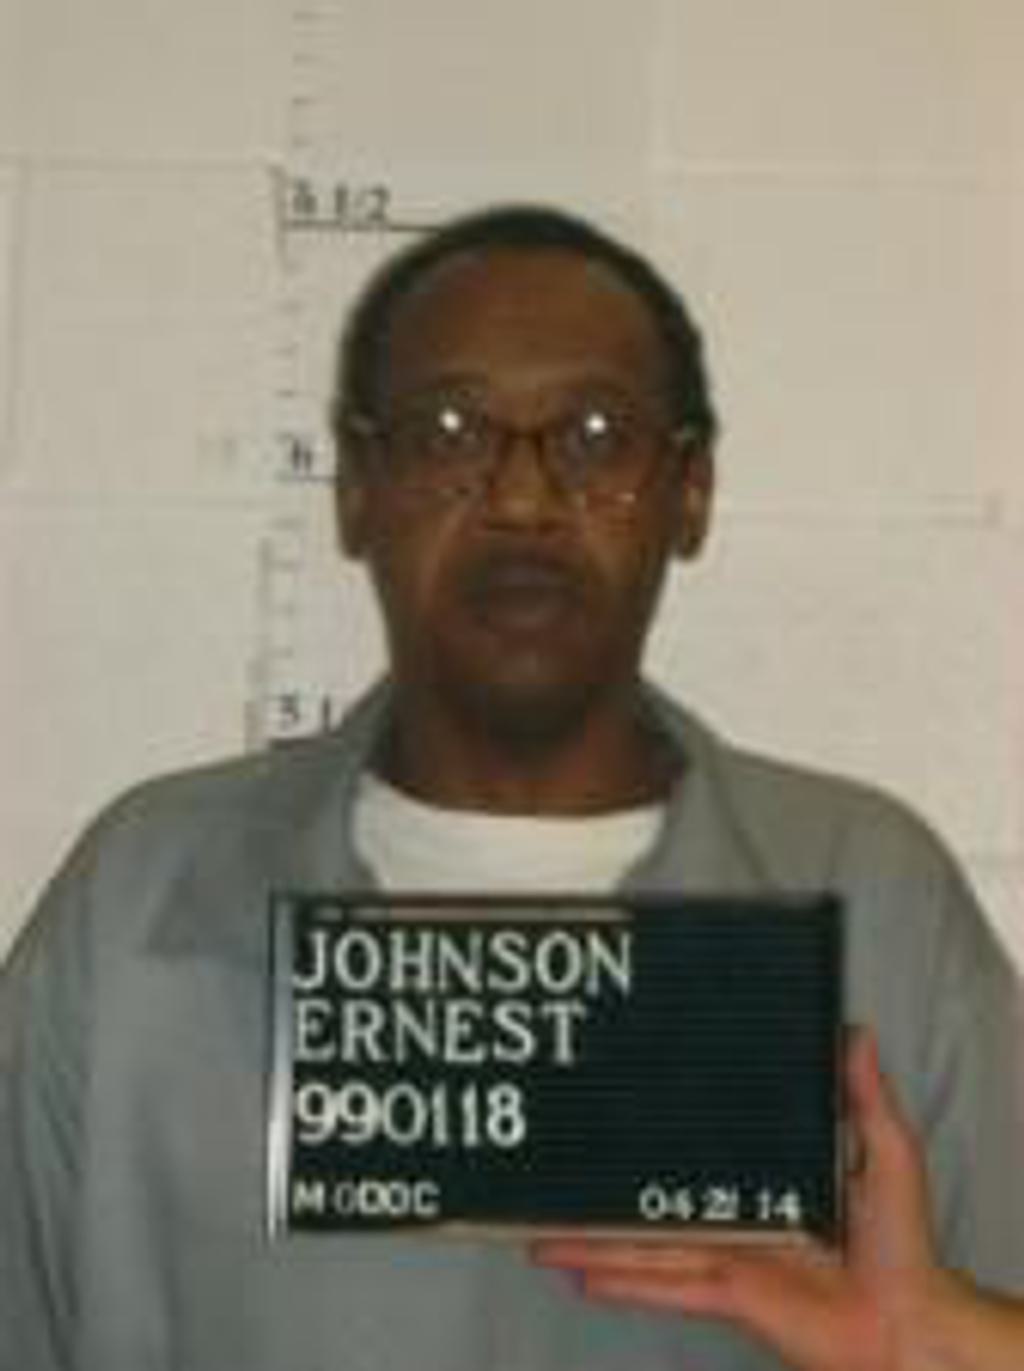 Missouri Scheduled to Execute Man Despite Evidence of Intellectual Disability